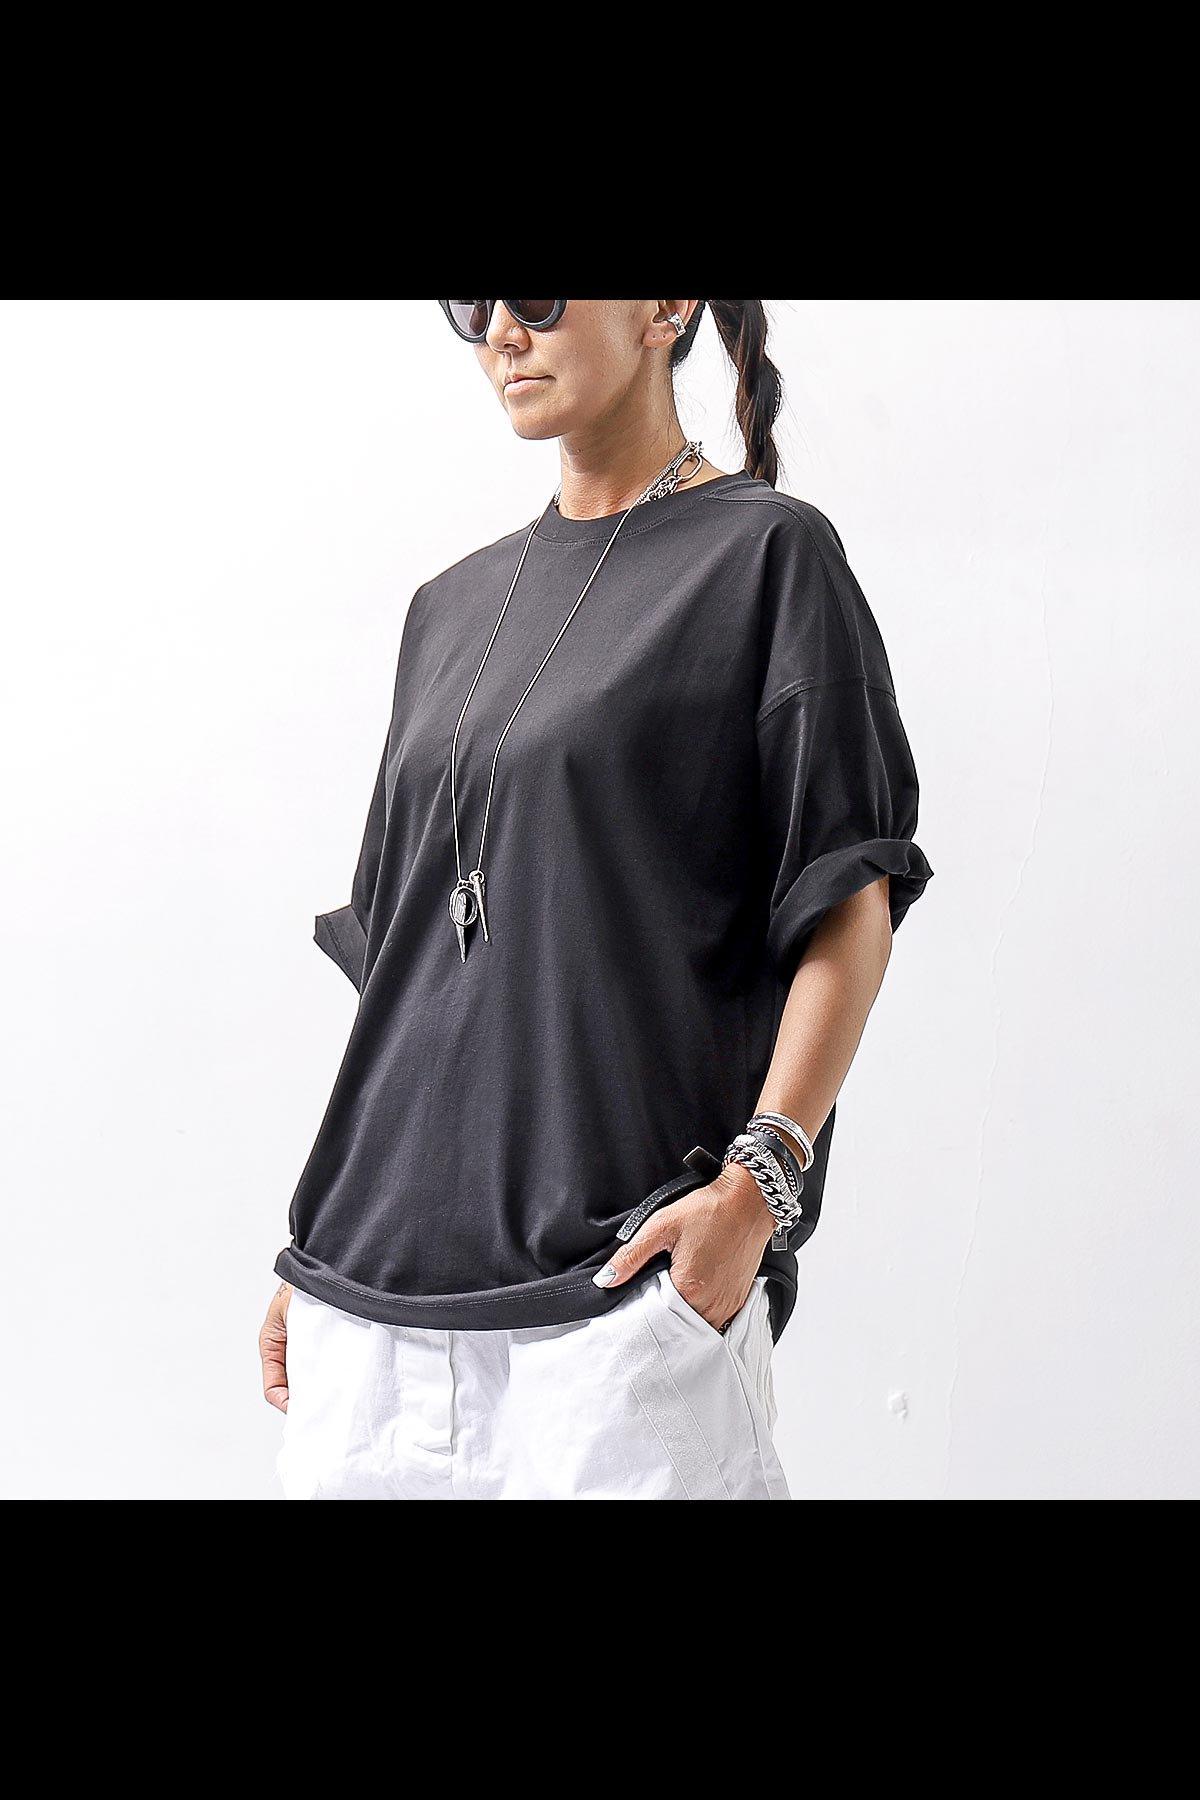 <img class='new_mark_img1' src='https://img.shop-pro.jp/img/new/icons8.gif' style='border:none;display:inline;margin:0px;padding:0px;width:auto;' />UNISEX OVERSIZED COTTON TEE MTS782_BLACK